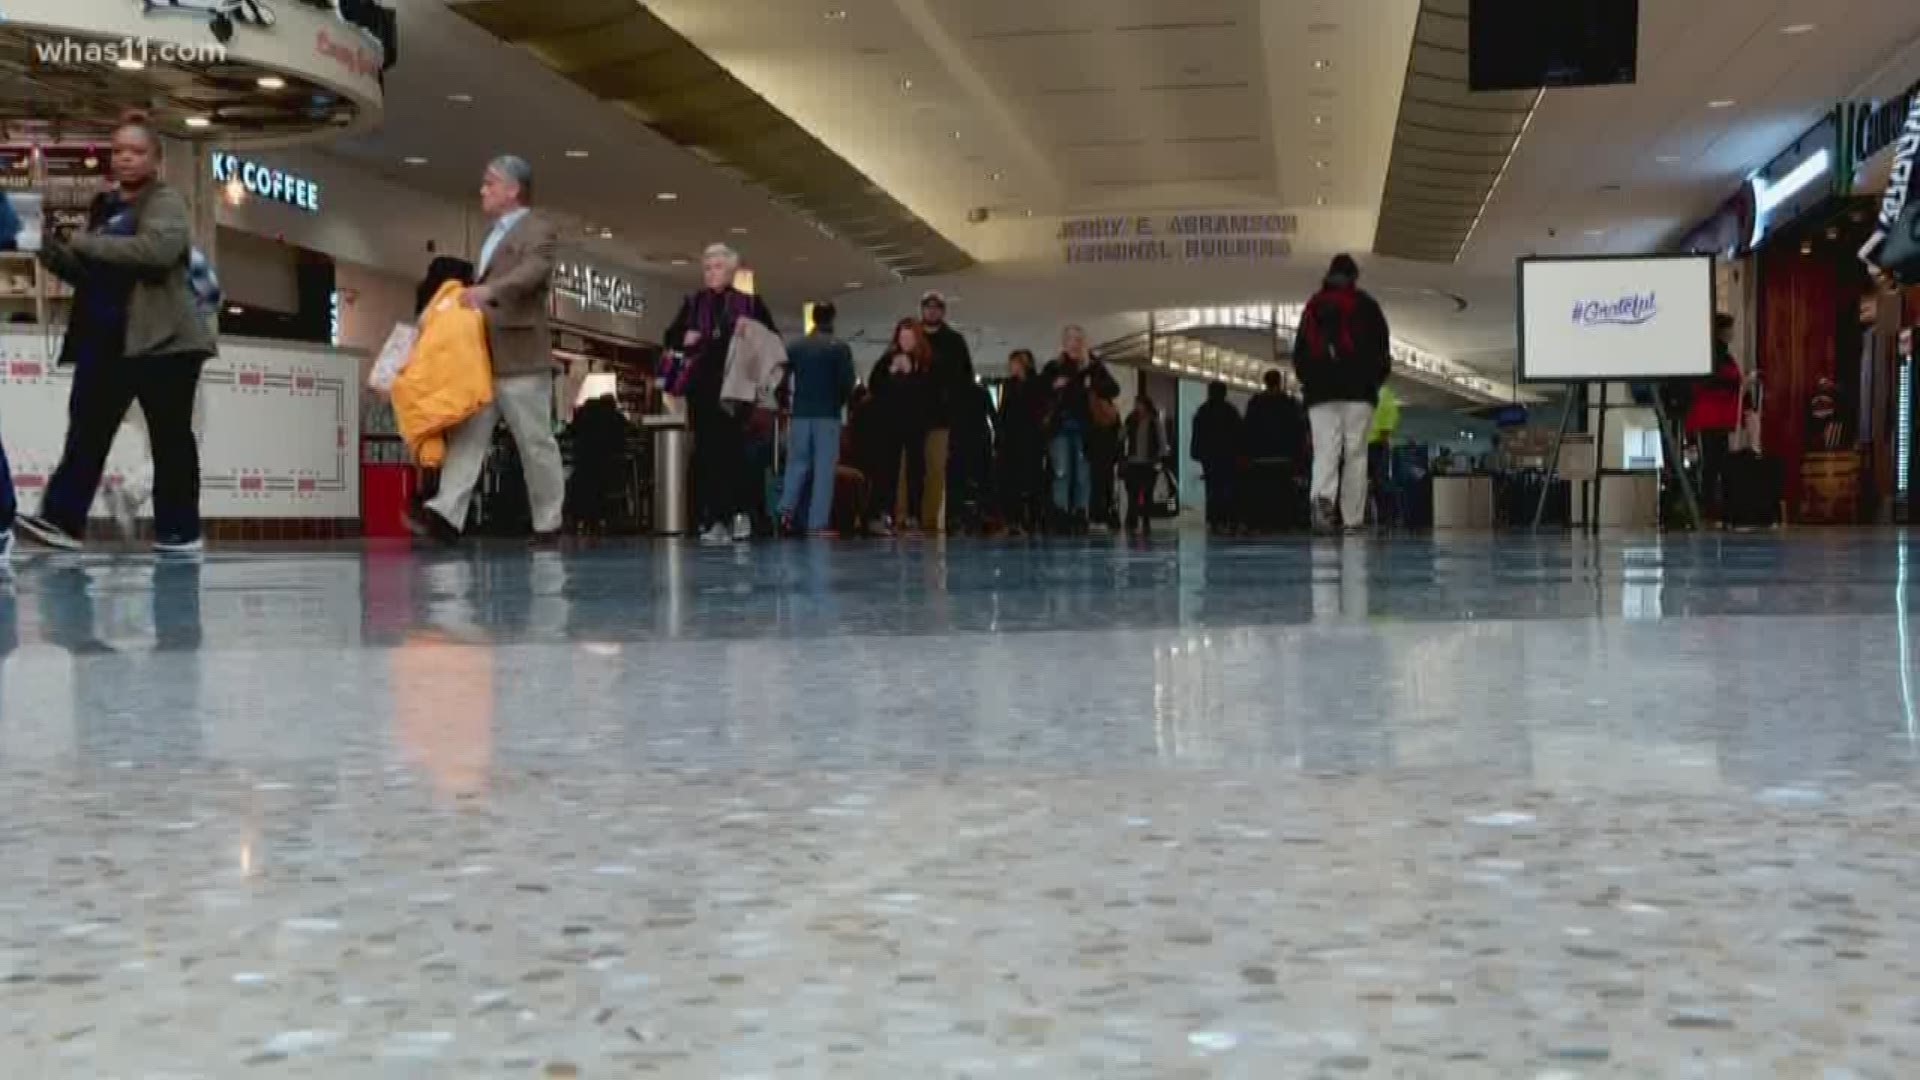 This year is expected to be the busiest year for Thanksgiving travel since 2005.